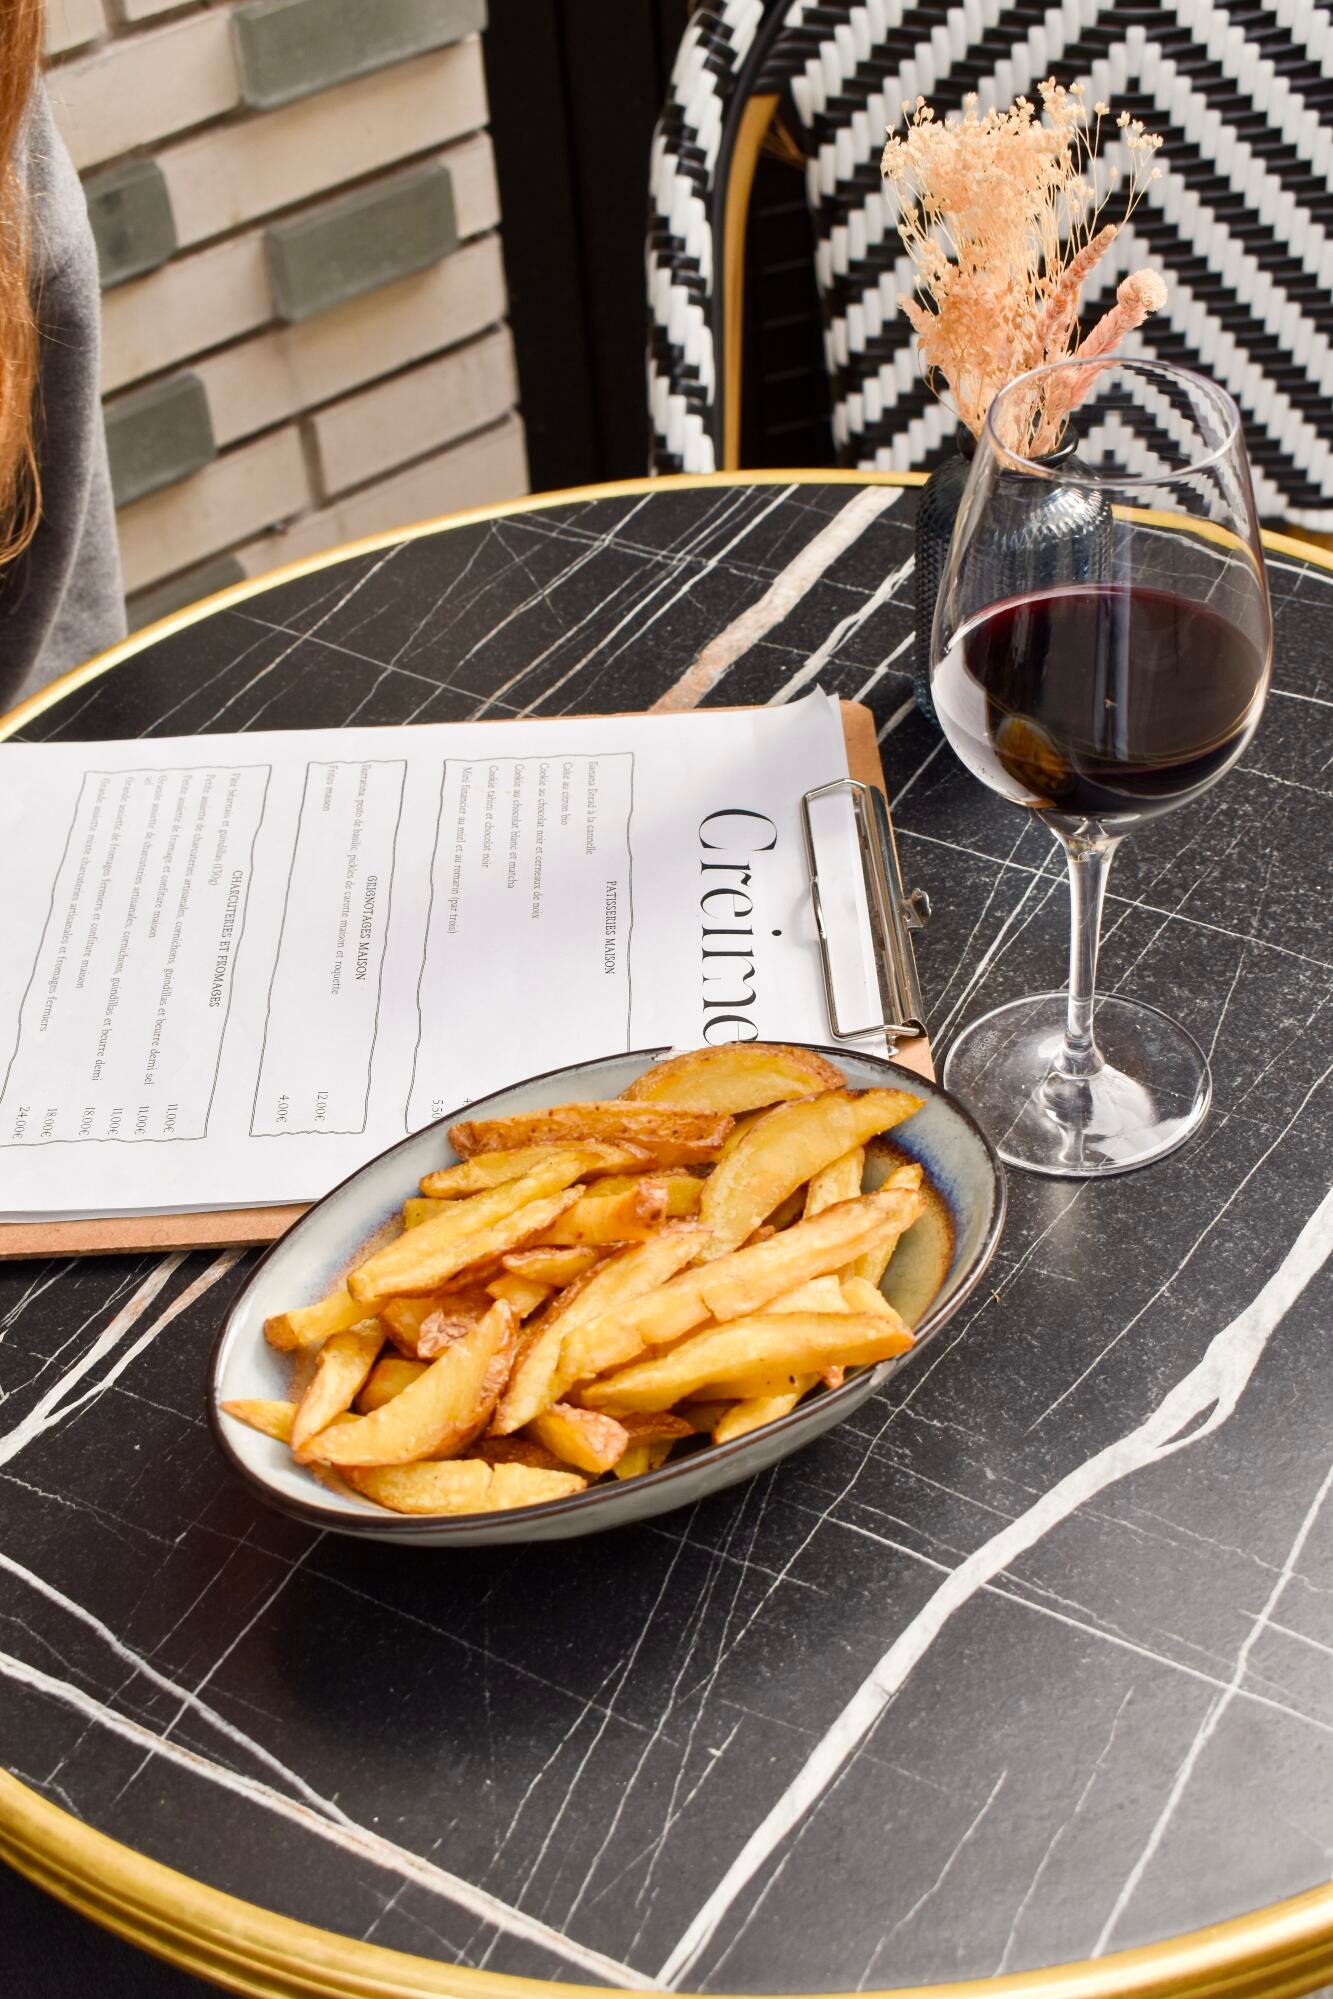 Café Restaurant Creime Food French fries Chips Drink red wine